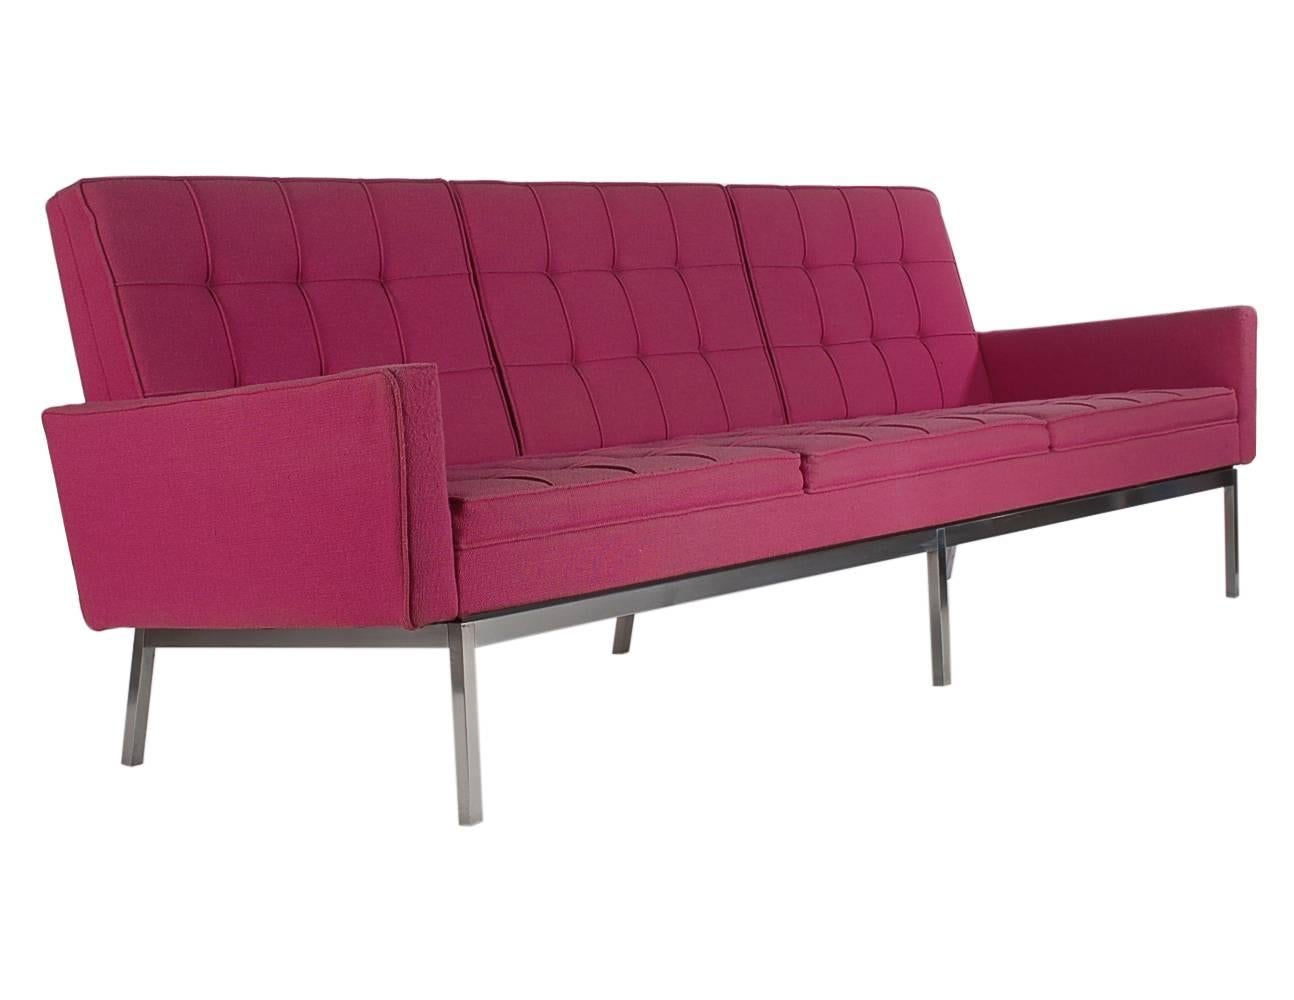 An iconic sofa designed by Florence Knoll and produced by Knoll in the early 1960s. It features a stainless steel frame with fuchsia tweed upholstery.